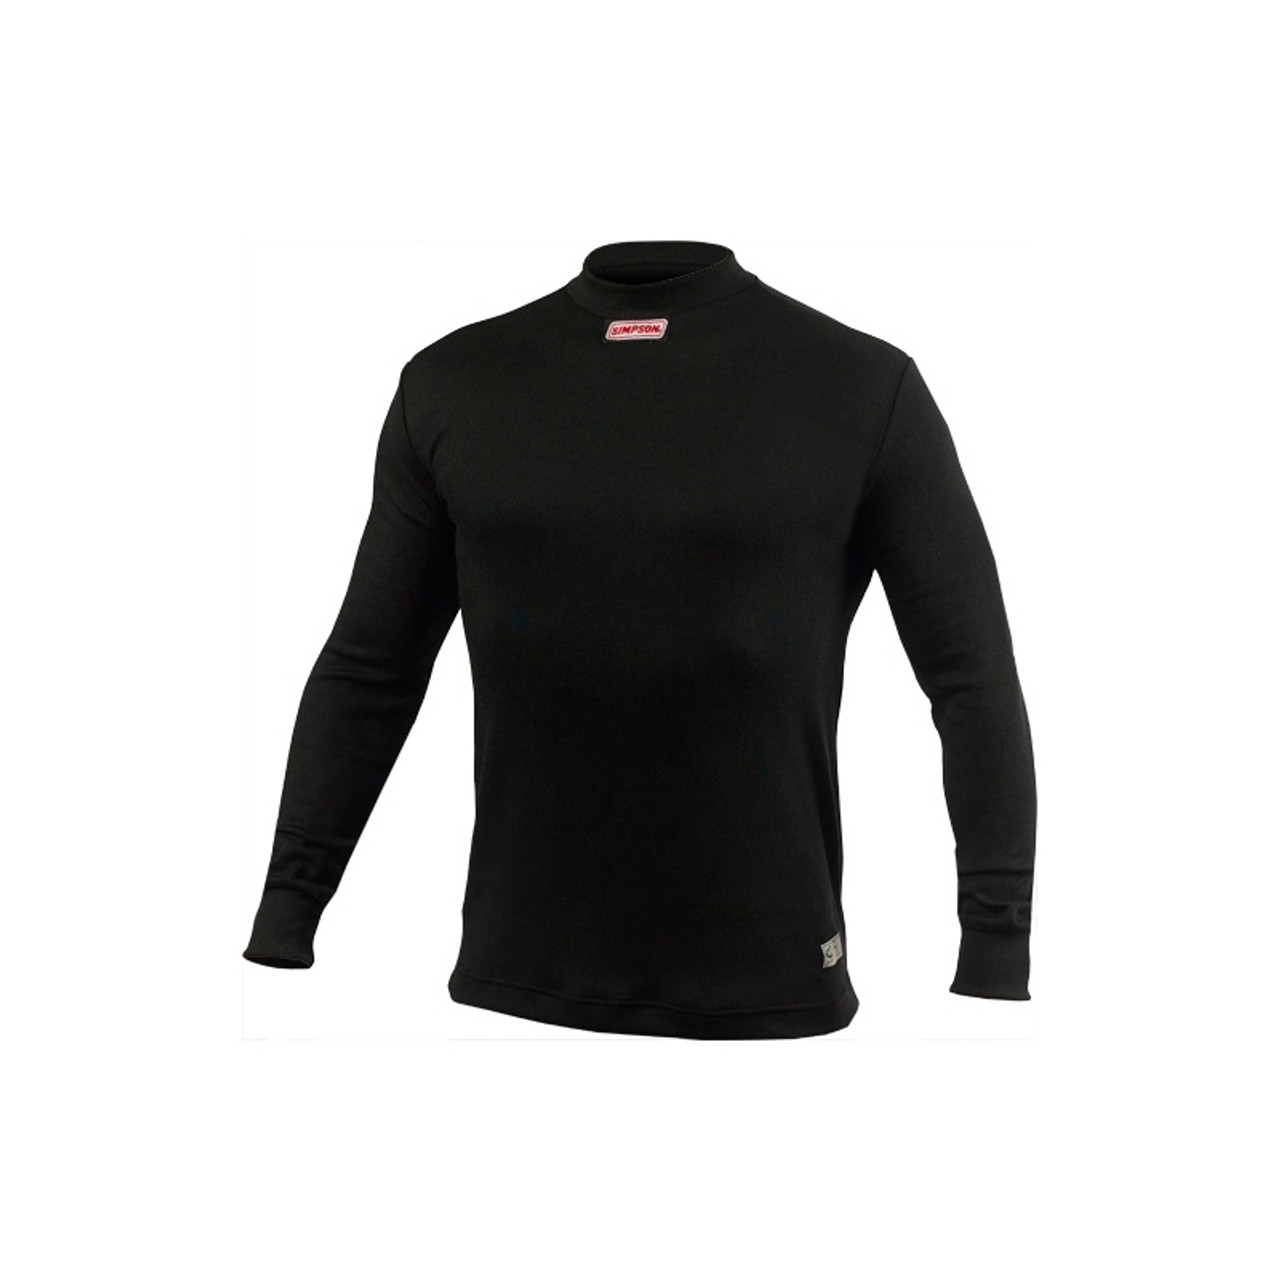 Simpson Safety Carbon X Underwear Top Small Long Sleeve